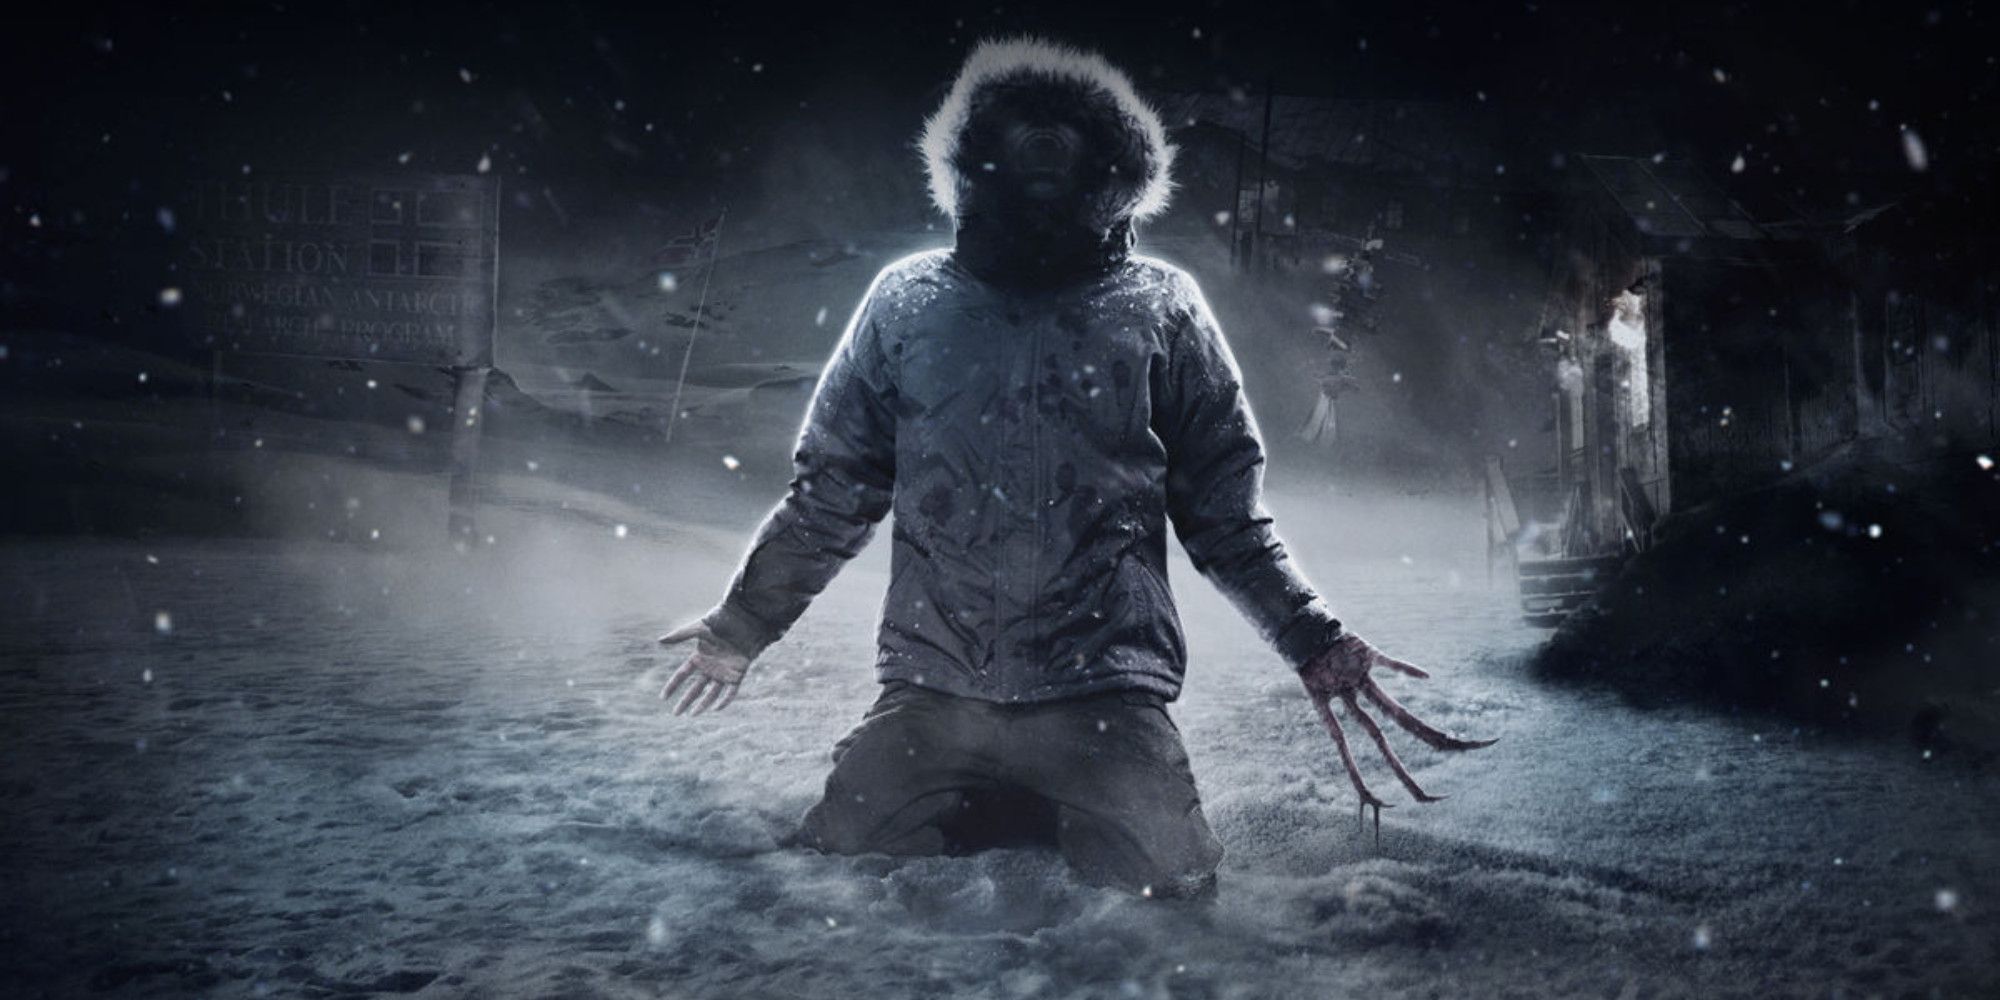 It's scary cold in an image from 2011's The Thing prequel